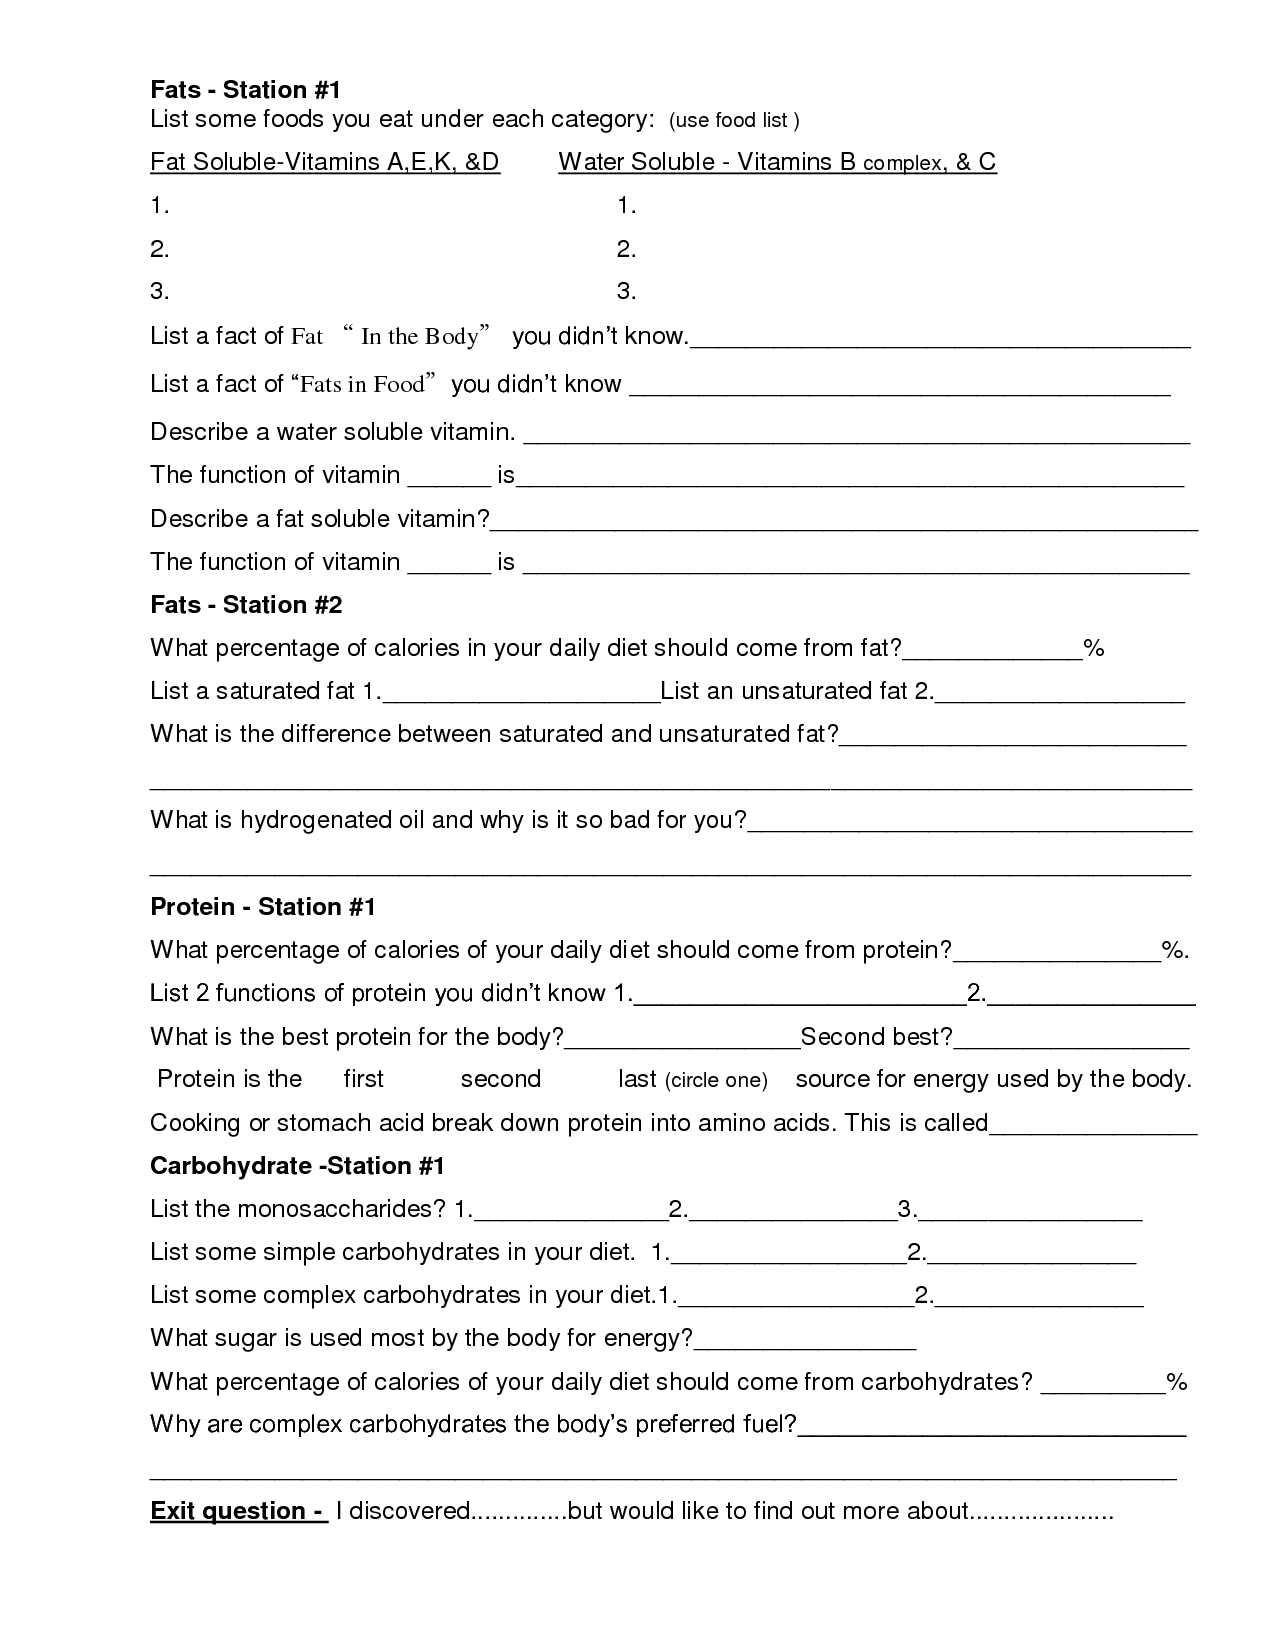 food-and-nutrition-worksheet